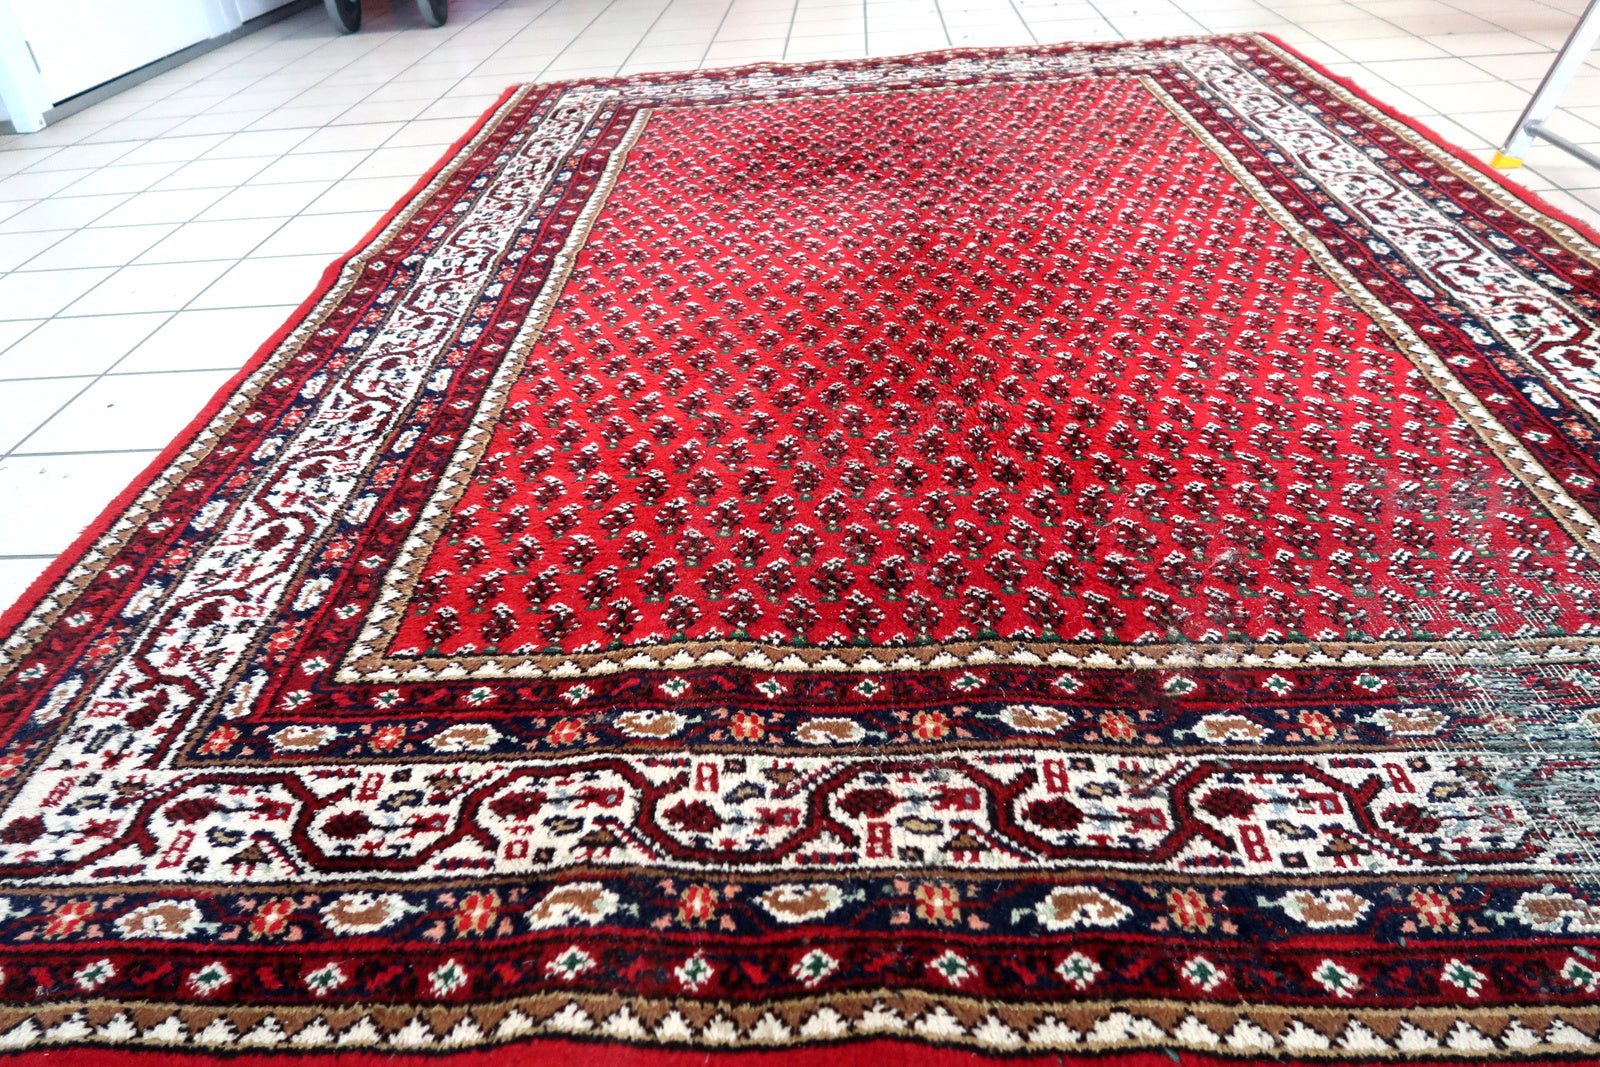 Handmade vintage Indian Seraband rug in original condition, it has some age wear on the one end. The rug has been made in traditional pattern, it is from end of 20th century. The shades of the rug are mostly in red and white. All-over design will bring some modern look to your space. All dyes on this rug are natural. This is the type of rug woven in India to compete in the same market as rugs from Persia.